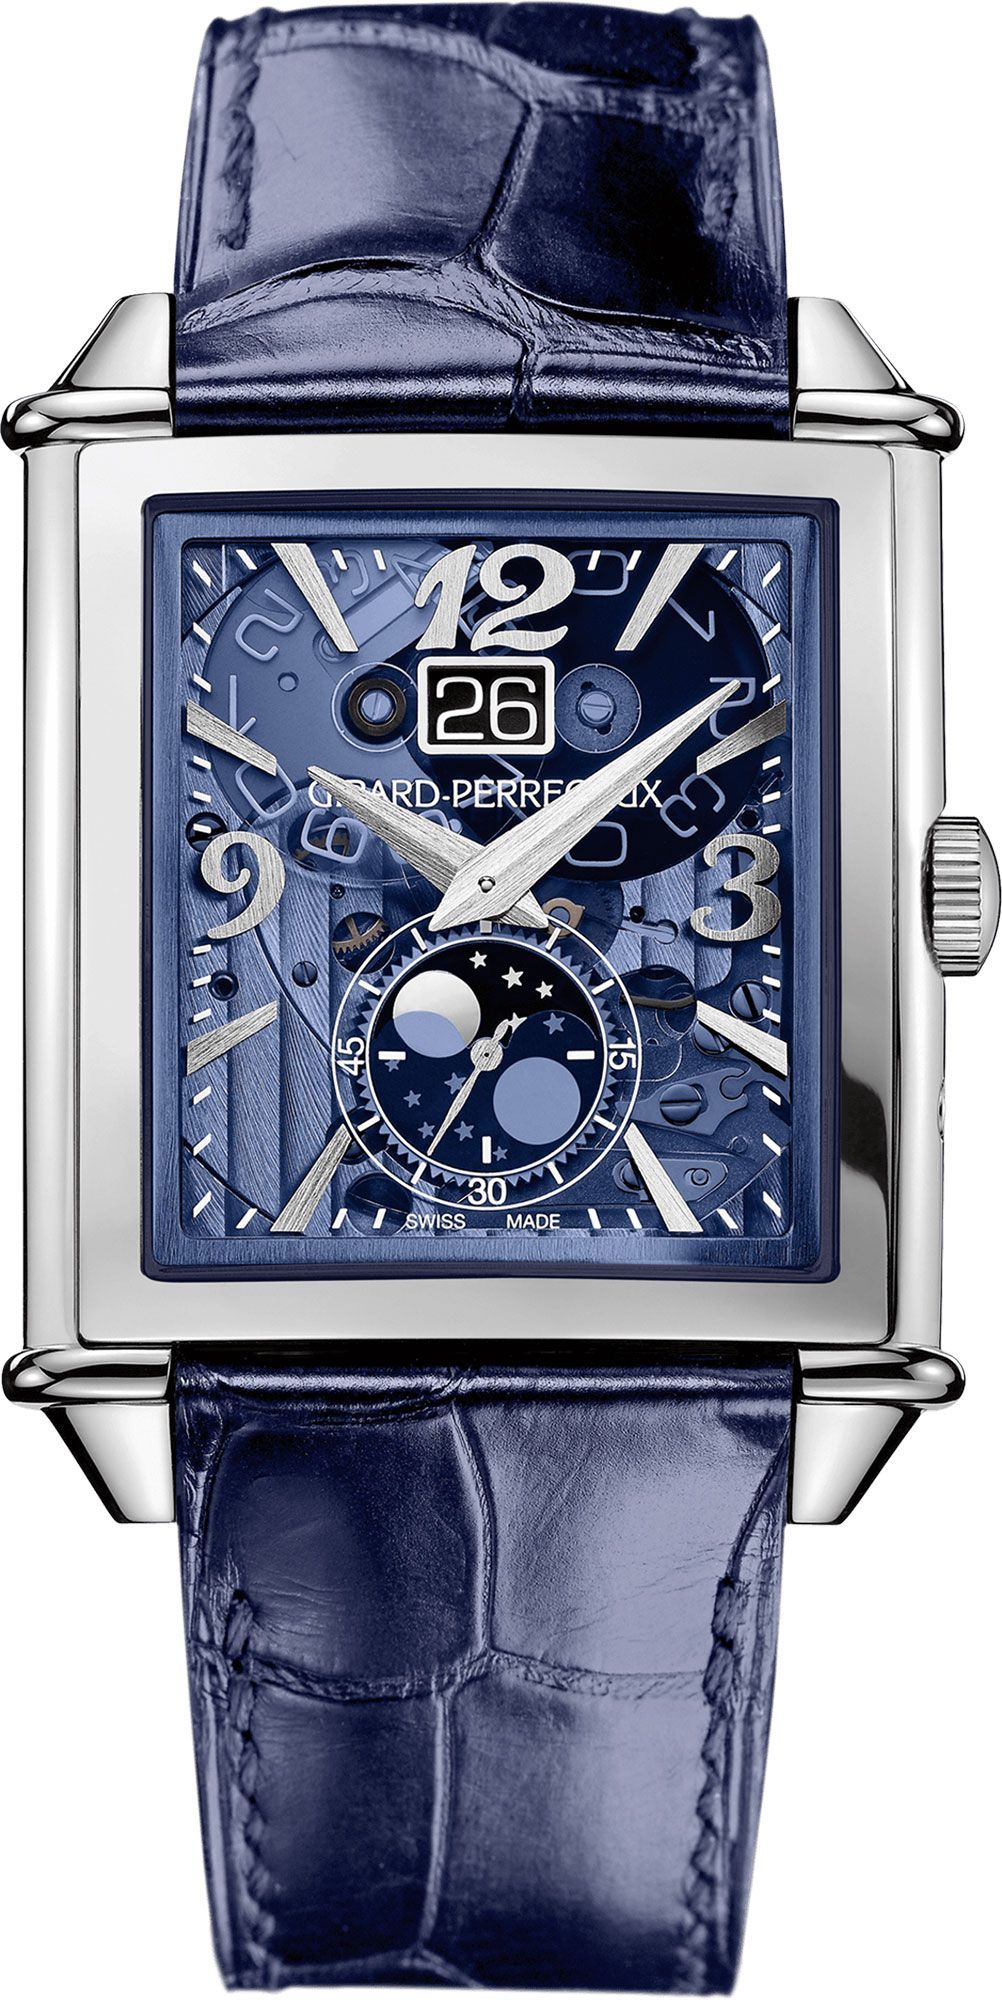 Girard-Perregaux Vintage 1945 Date And Moon Phases Blue Dial 35.25 mm Automatic Watch For Men - 1